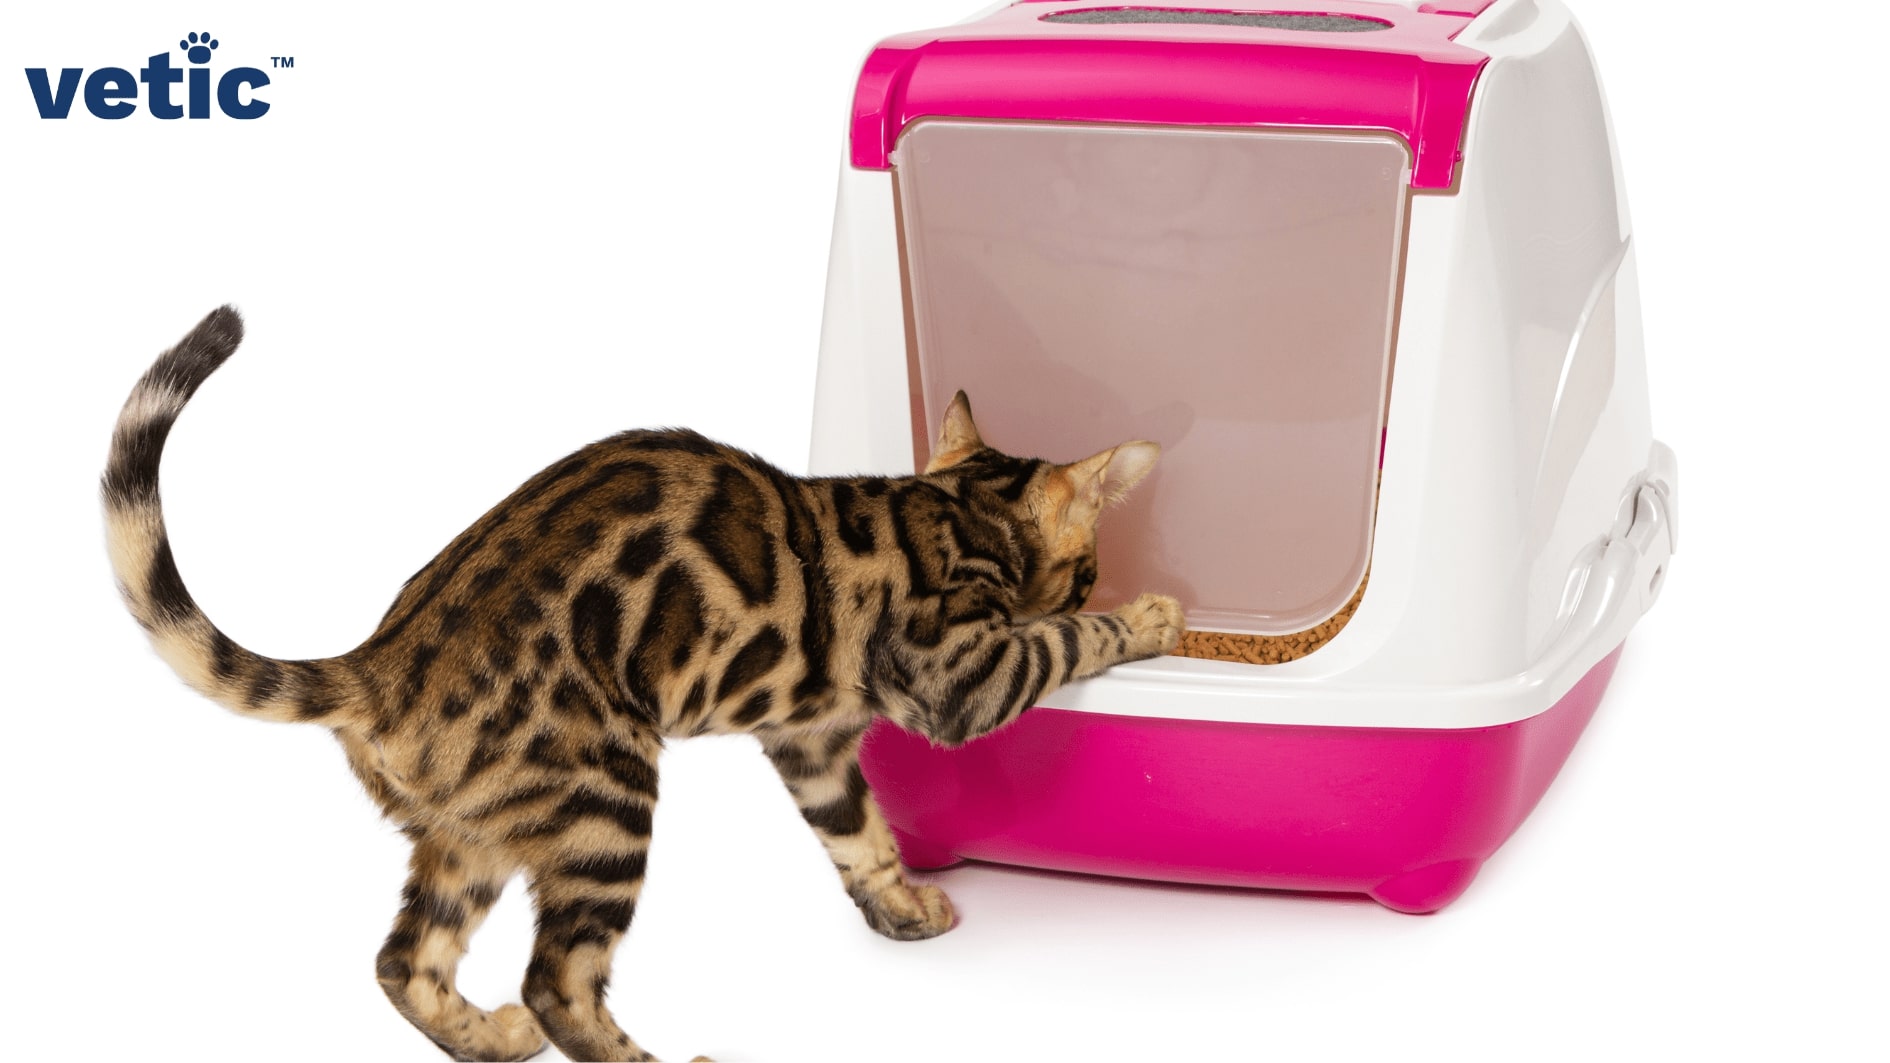 A Bengal cat entering a closed cat litter box through the front entrance.